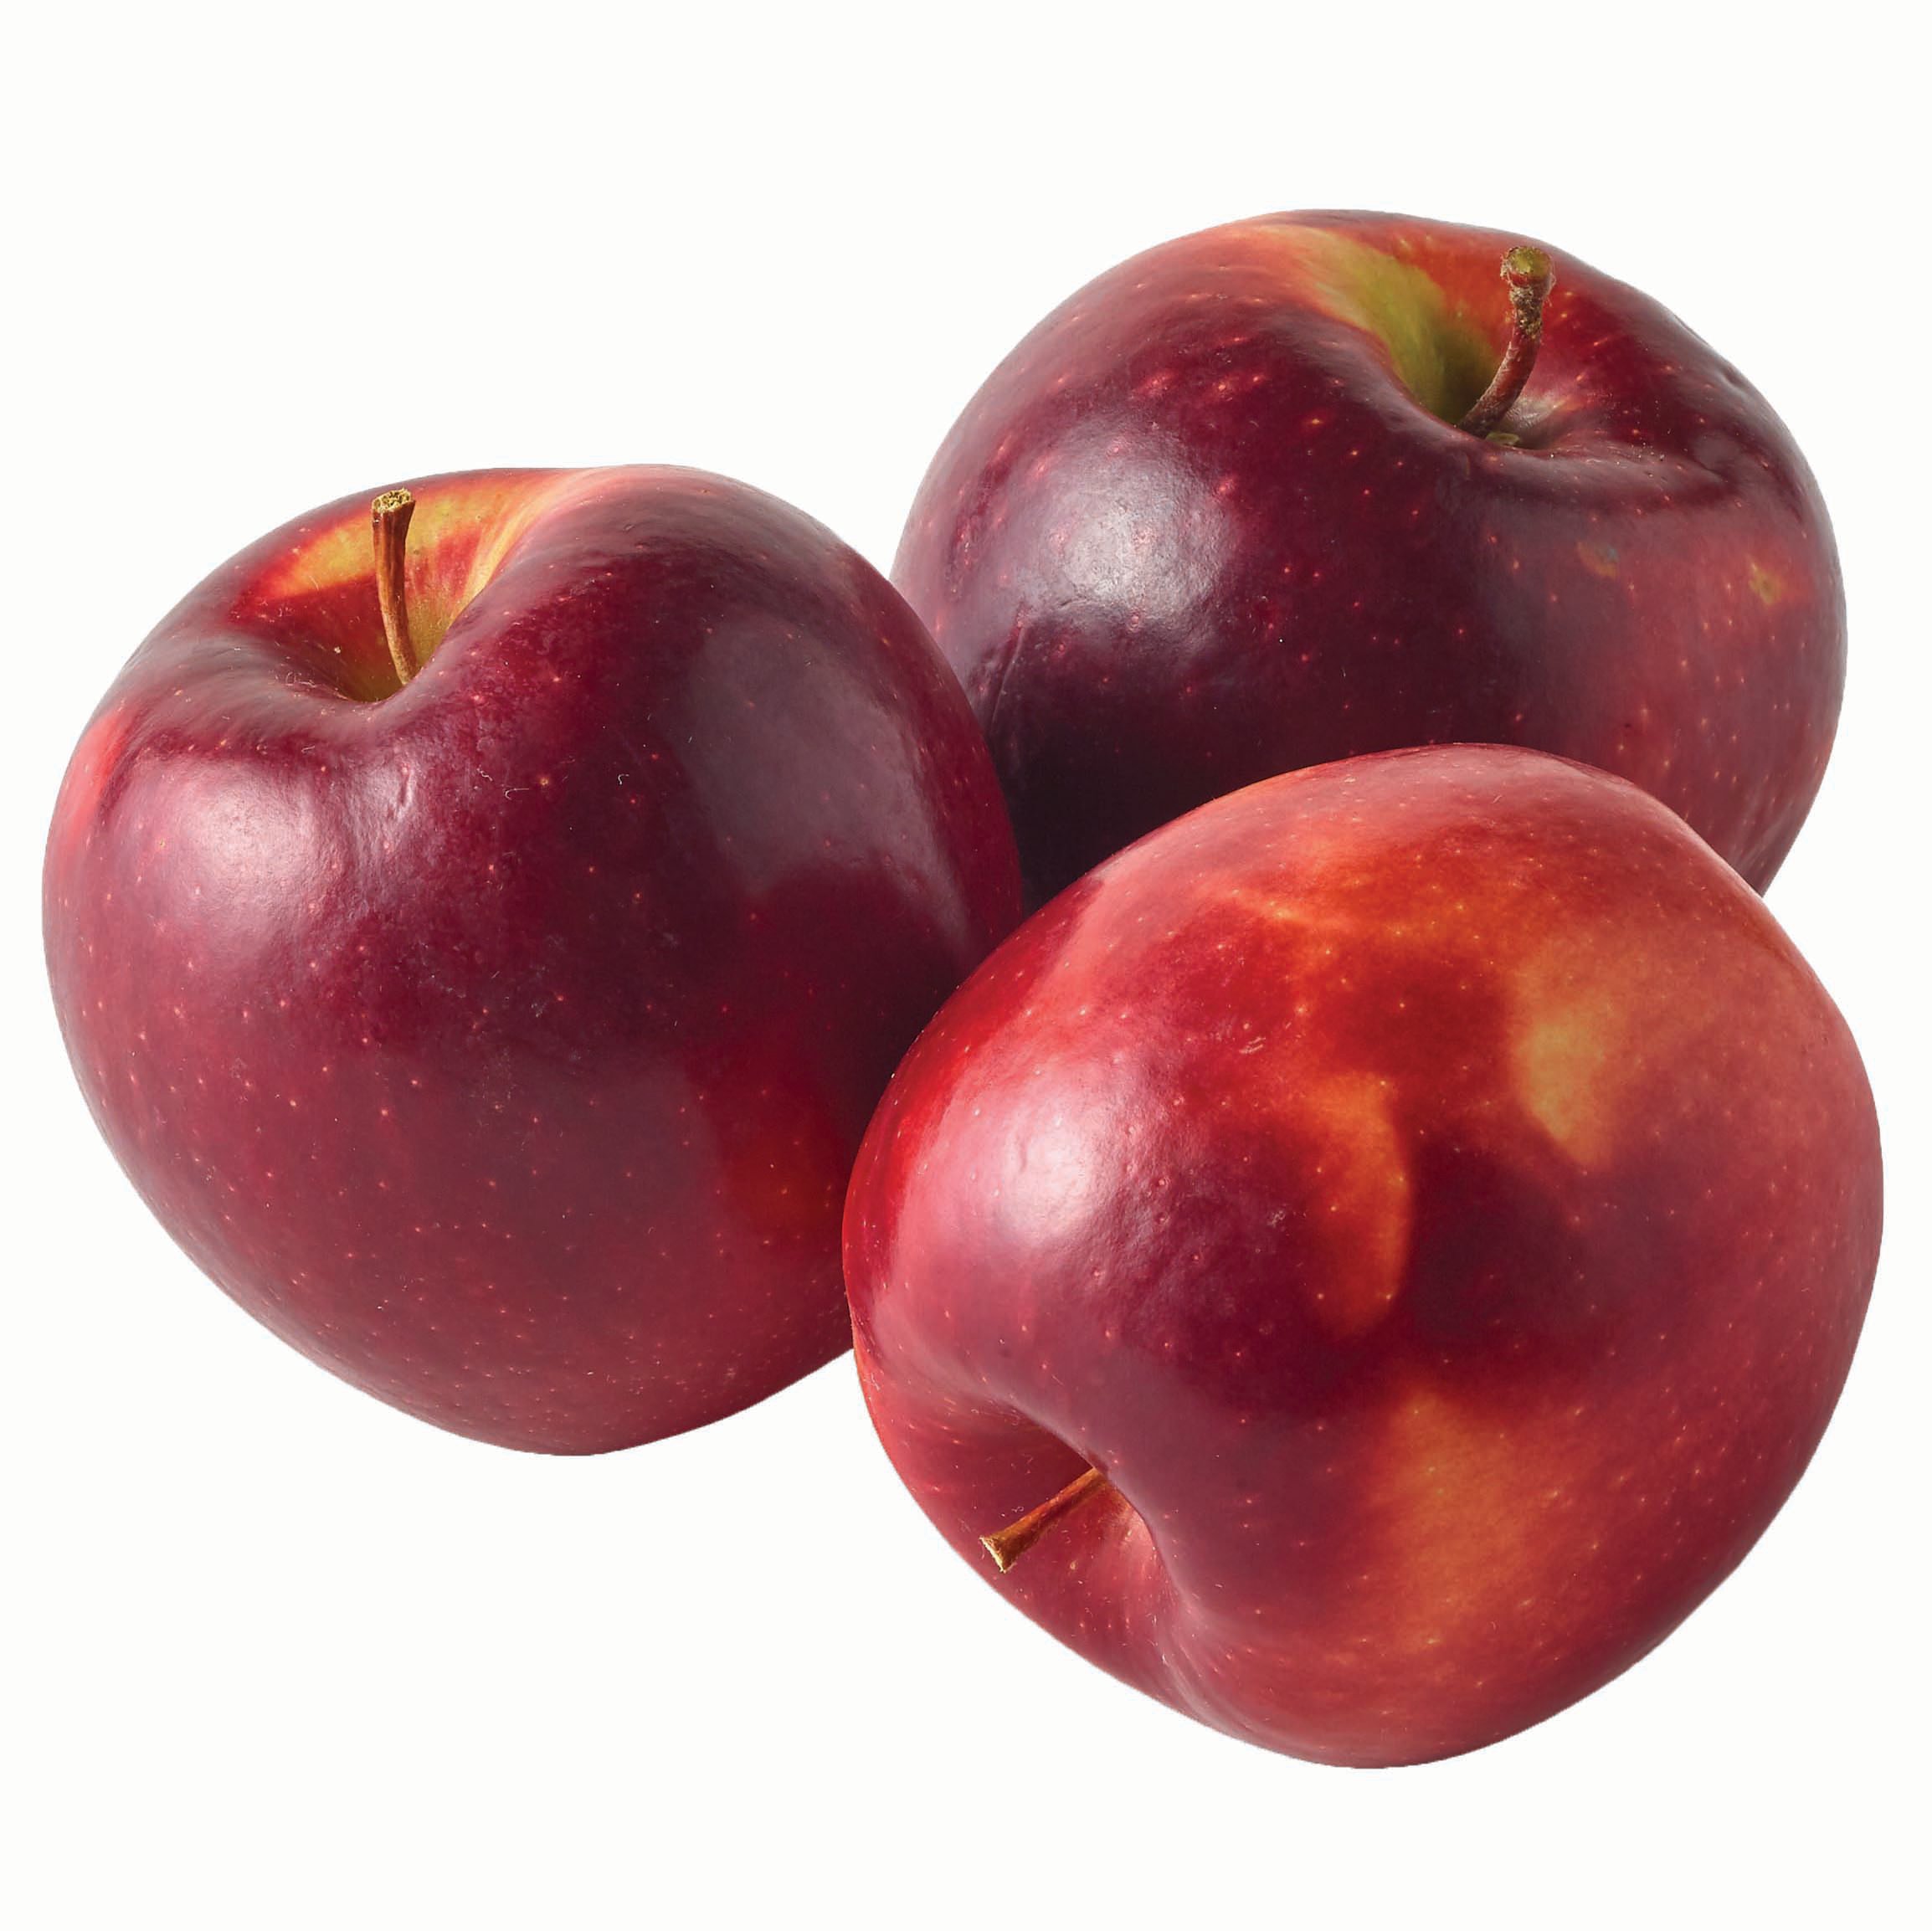 Red Delicious Apple Review - Apple Rankings by The Appleist Brian